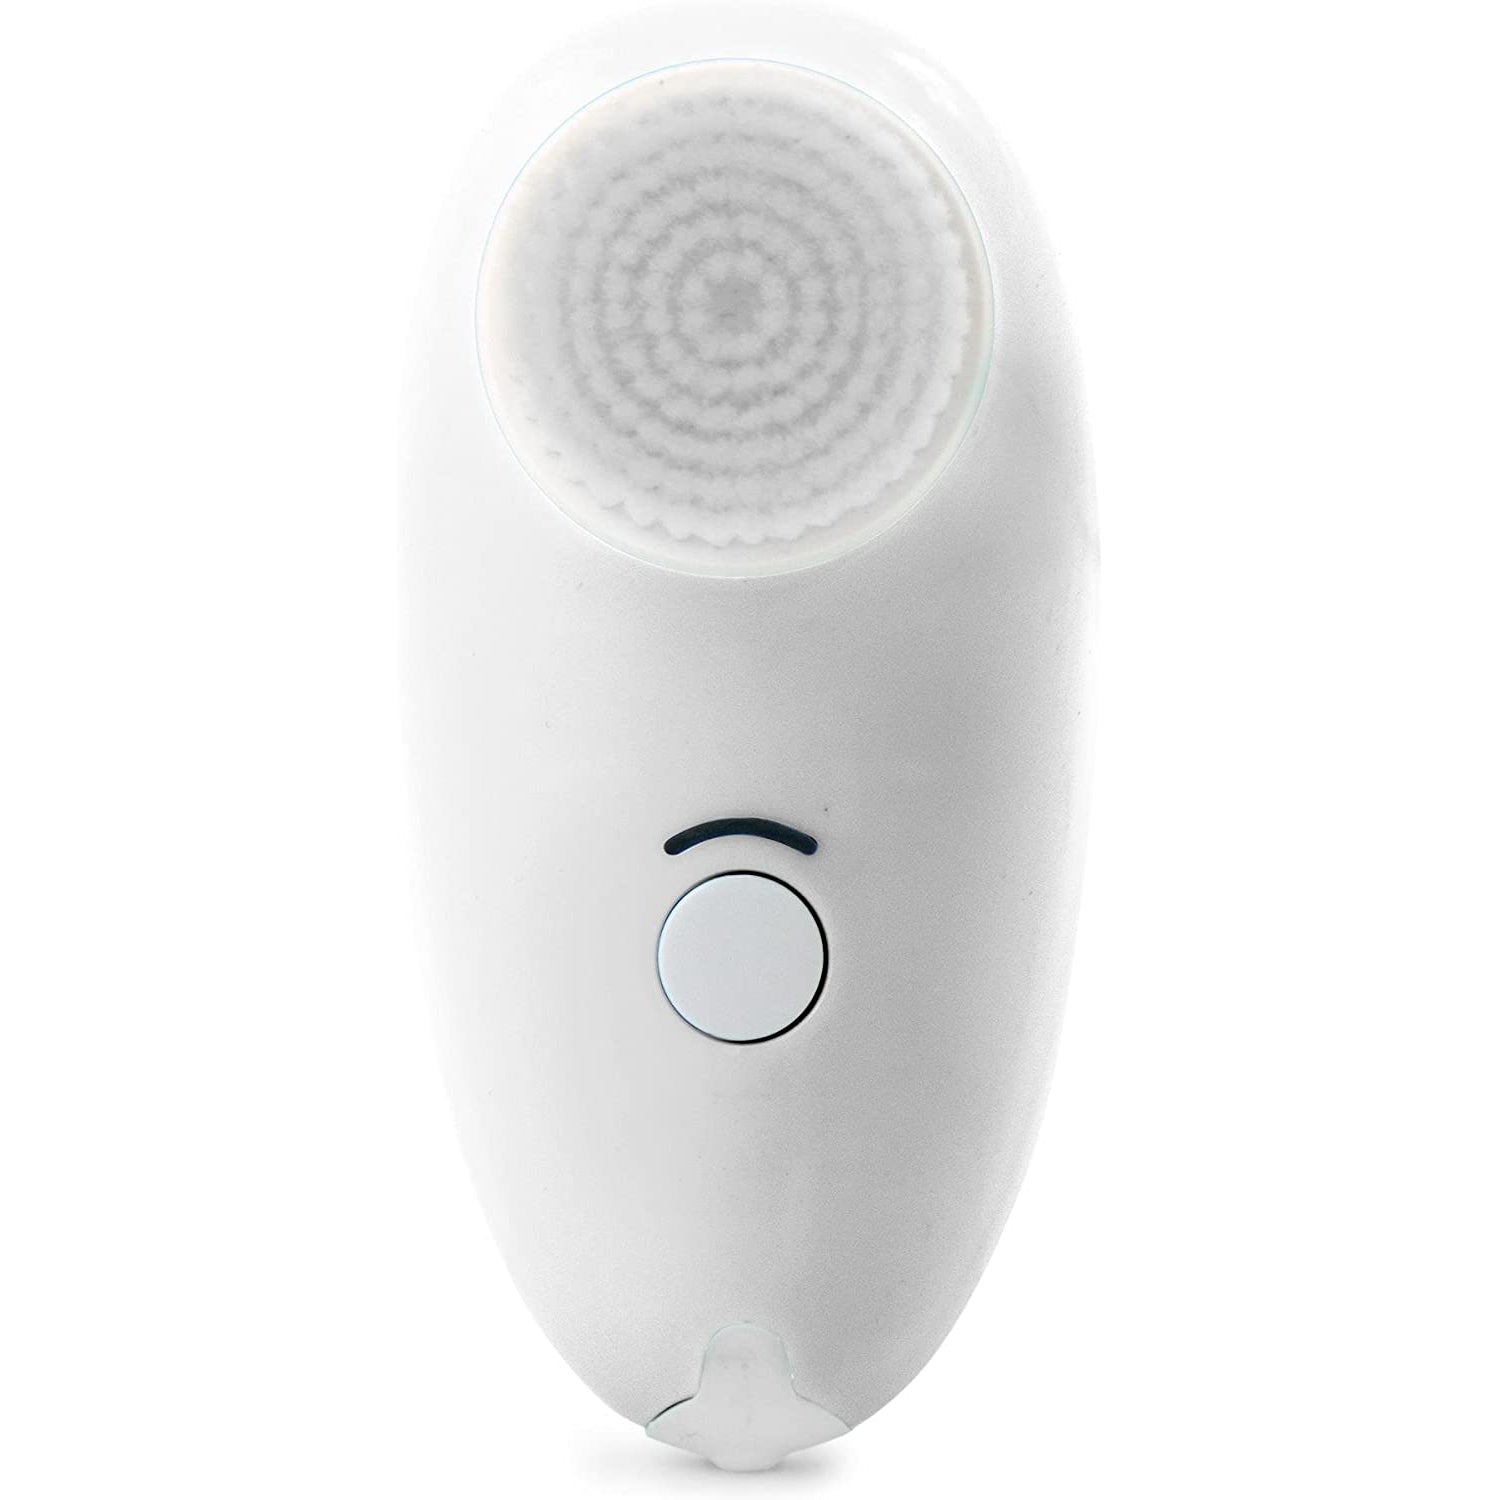 Magnitone First Step Vibra Sonic Compact Daily Cleansing Brush